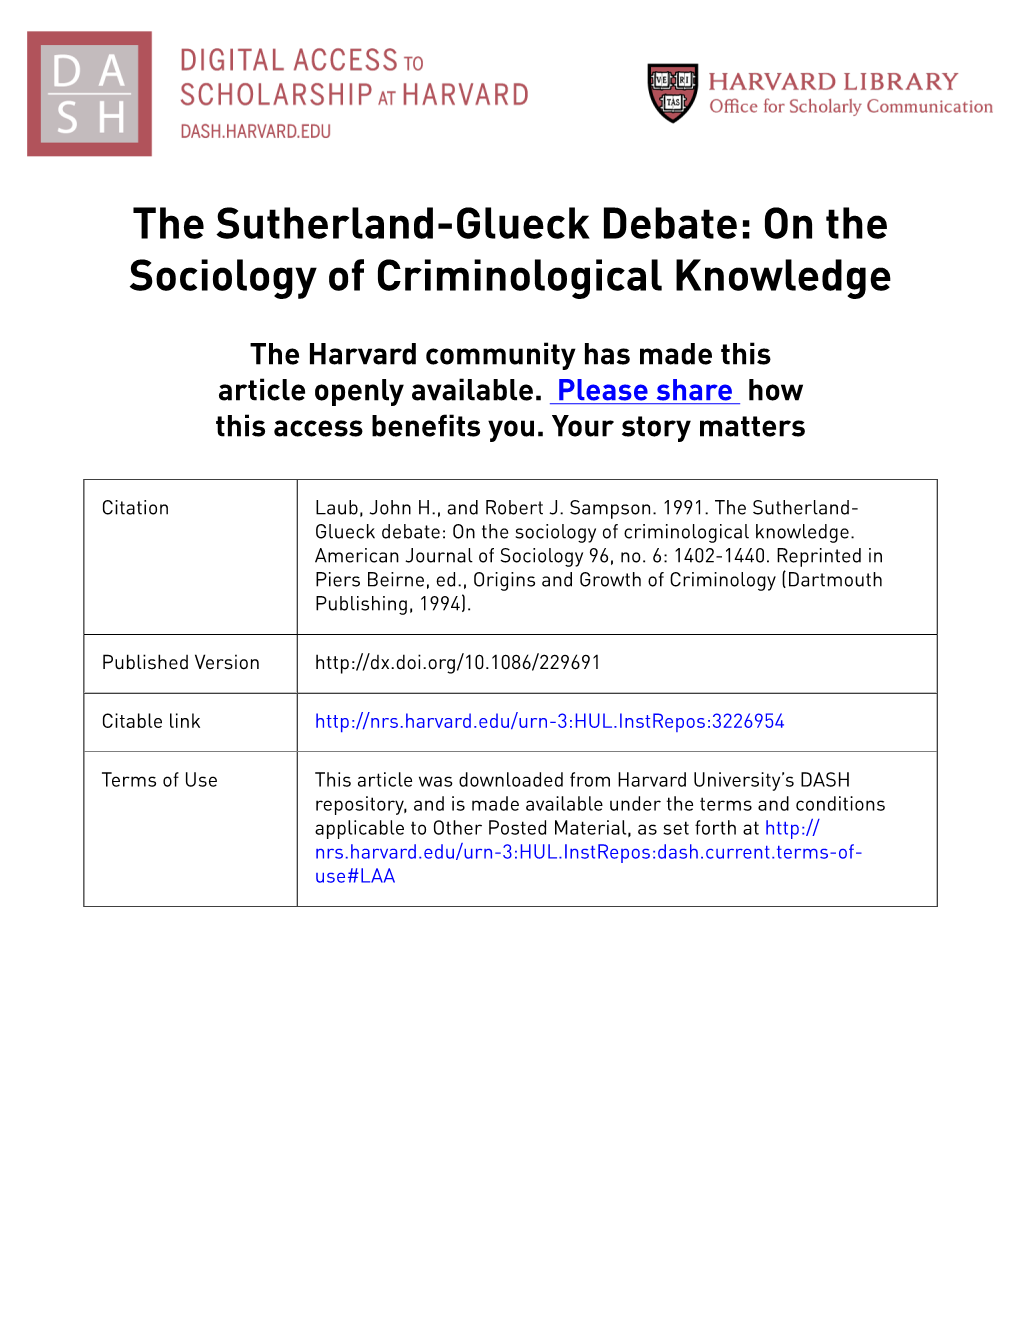 The Sutherland-Glueck Debate: on the Sociology of Criminological Knowledge